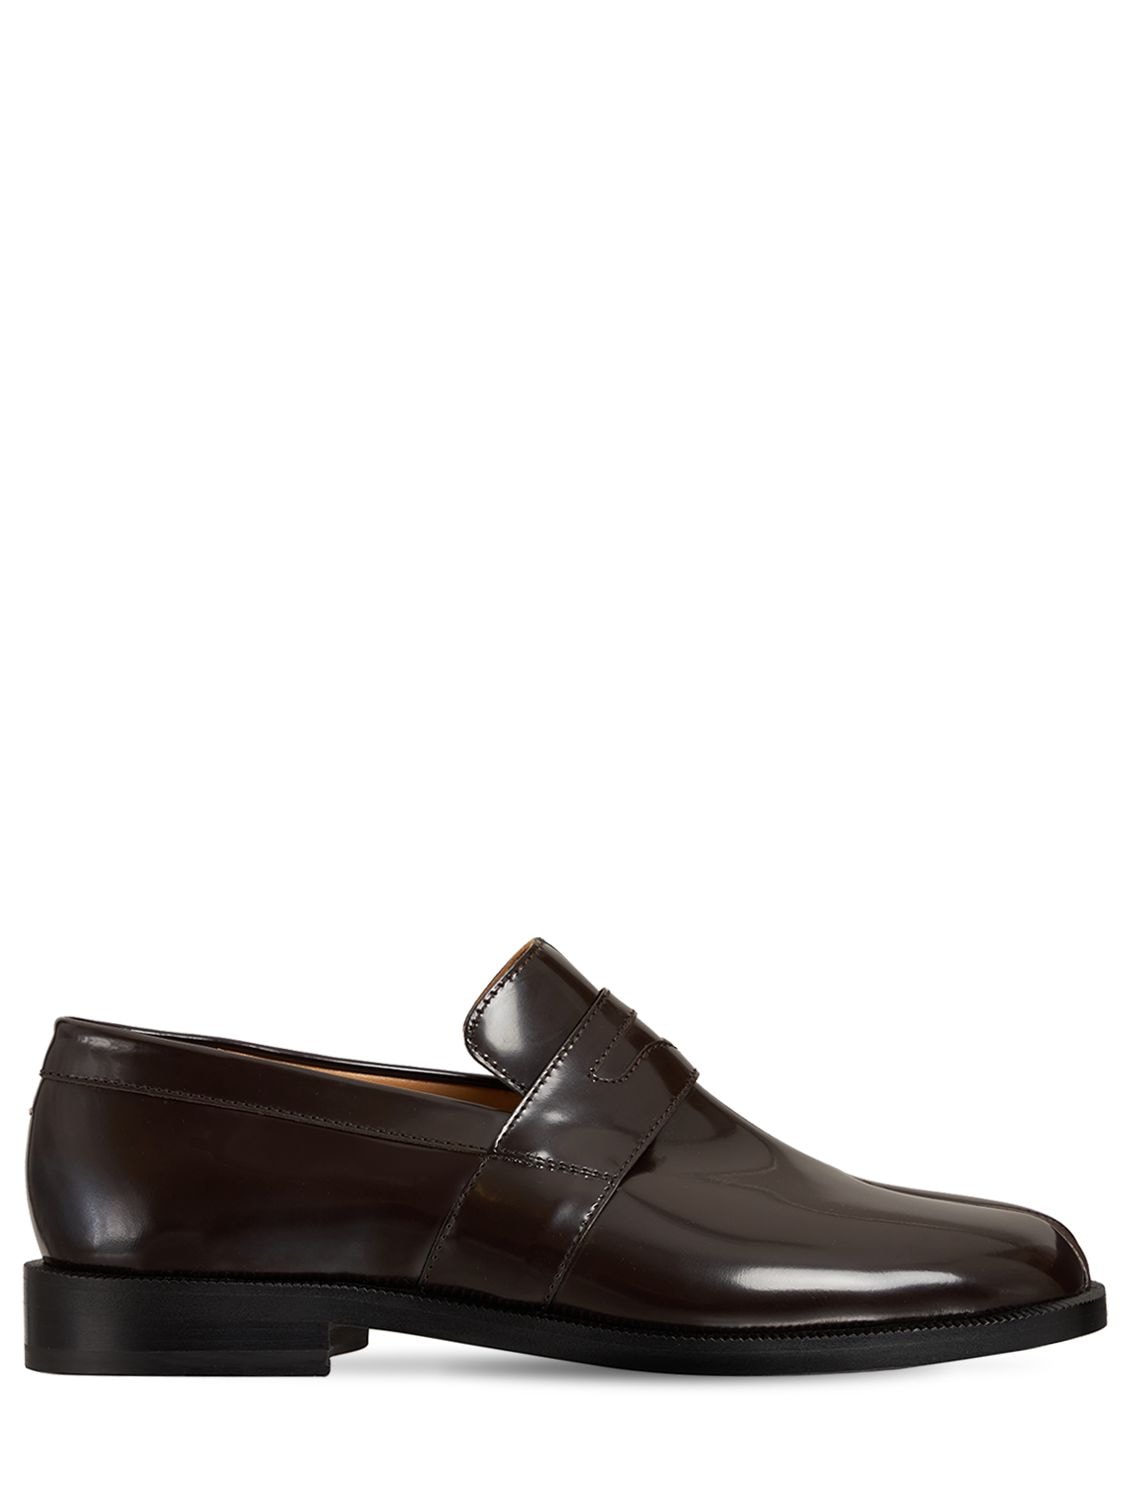 Maison Margiela 20mm Tabi Brushed Leather Loafers In Brown